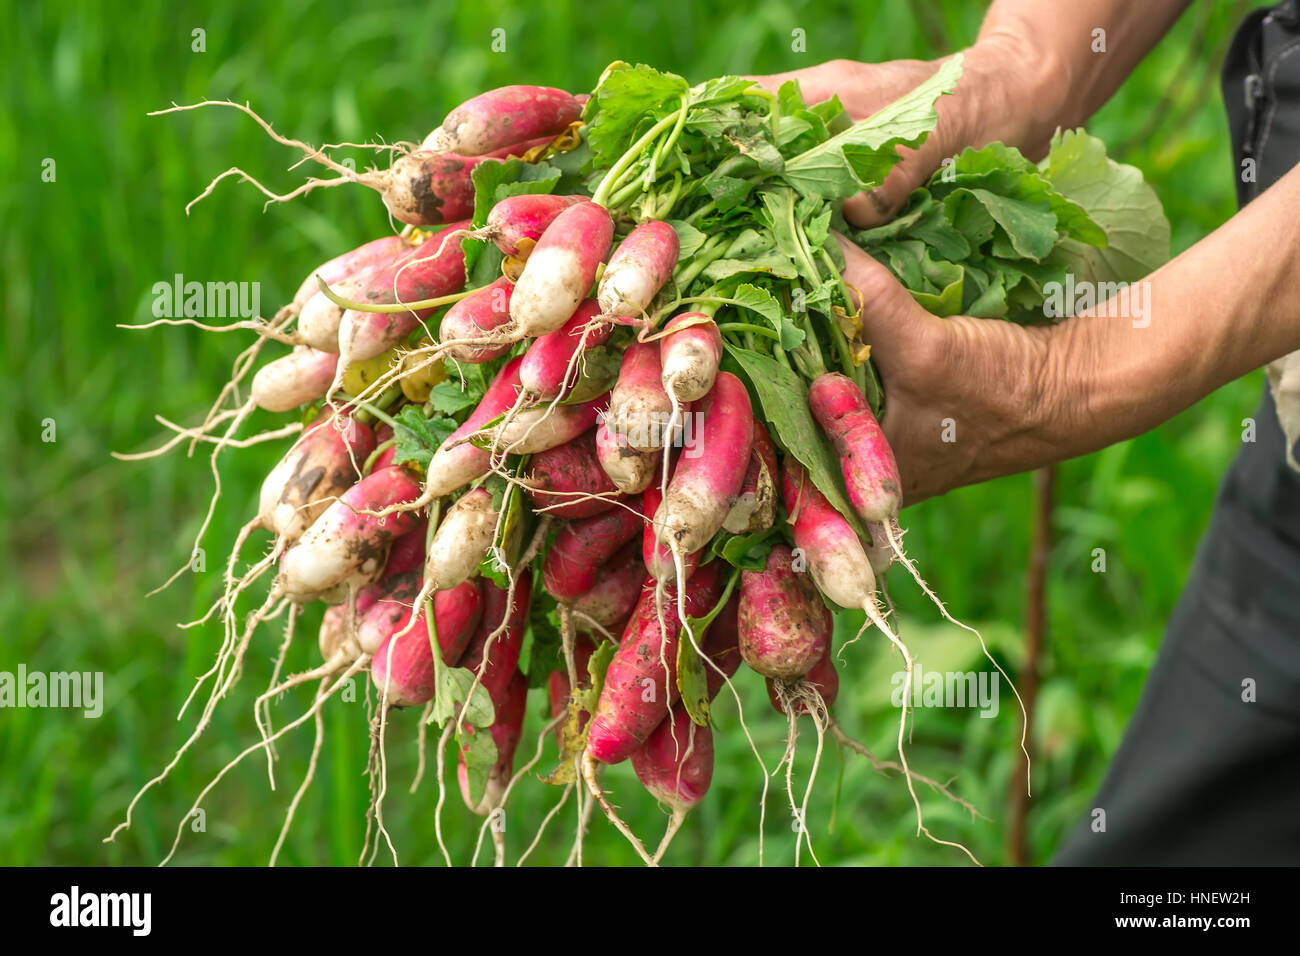 Radish in hand. Hands gardener. Work-worn hands. Farmers hands with freshly radish. Freshly picked vegetables. Unwashed radishes with tops Stock Photo